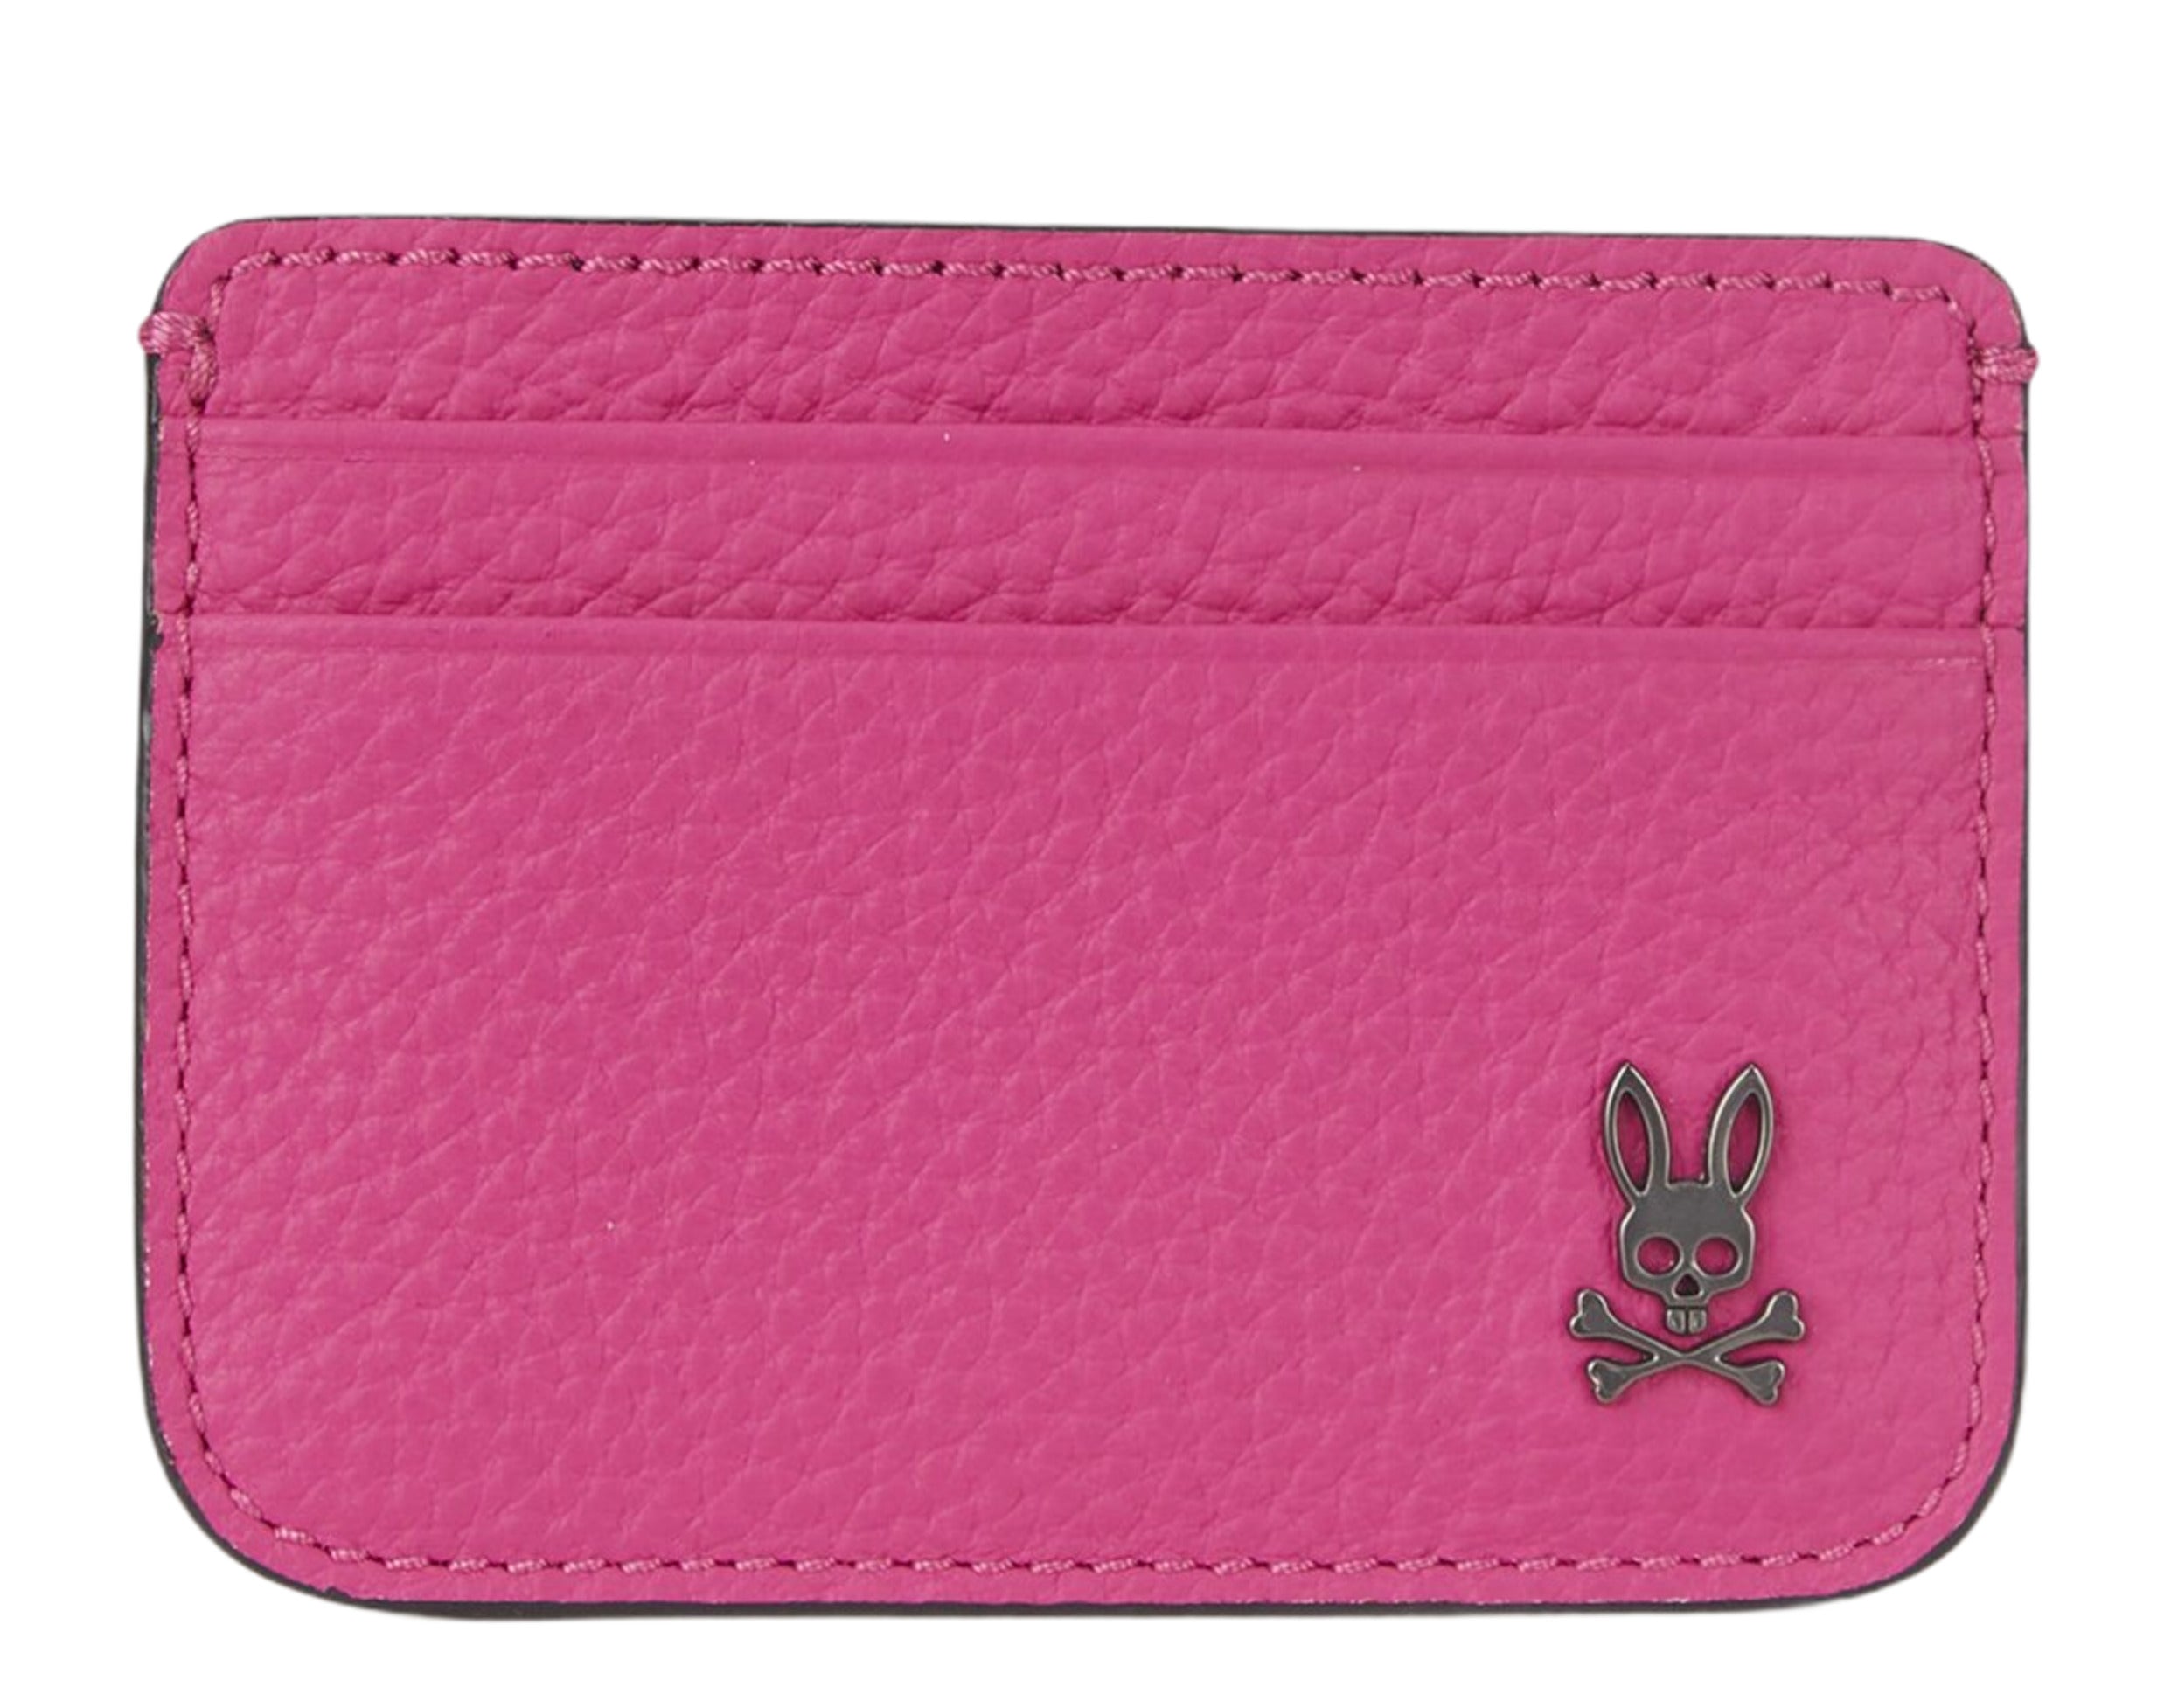 Best Gucci Checkbook Cover Wallet for sale in Orlando, Florida for 2023